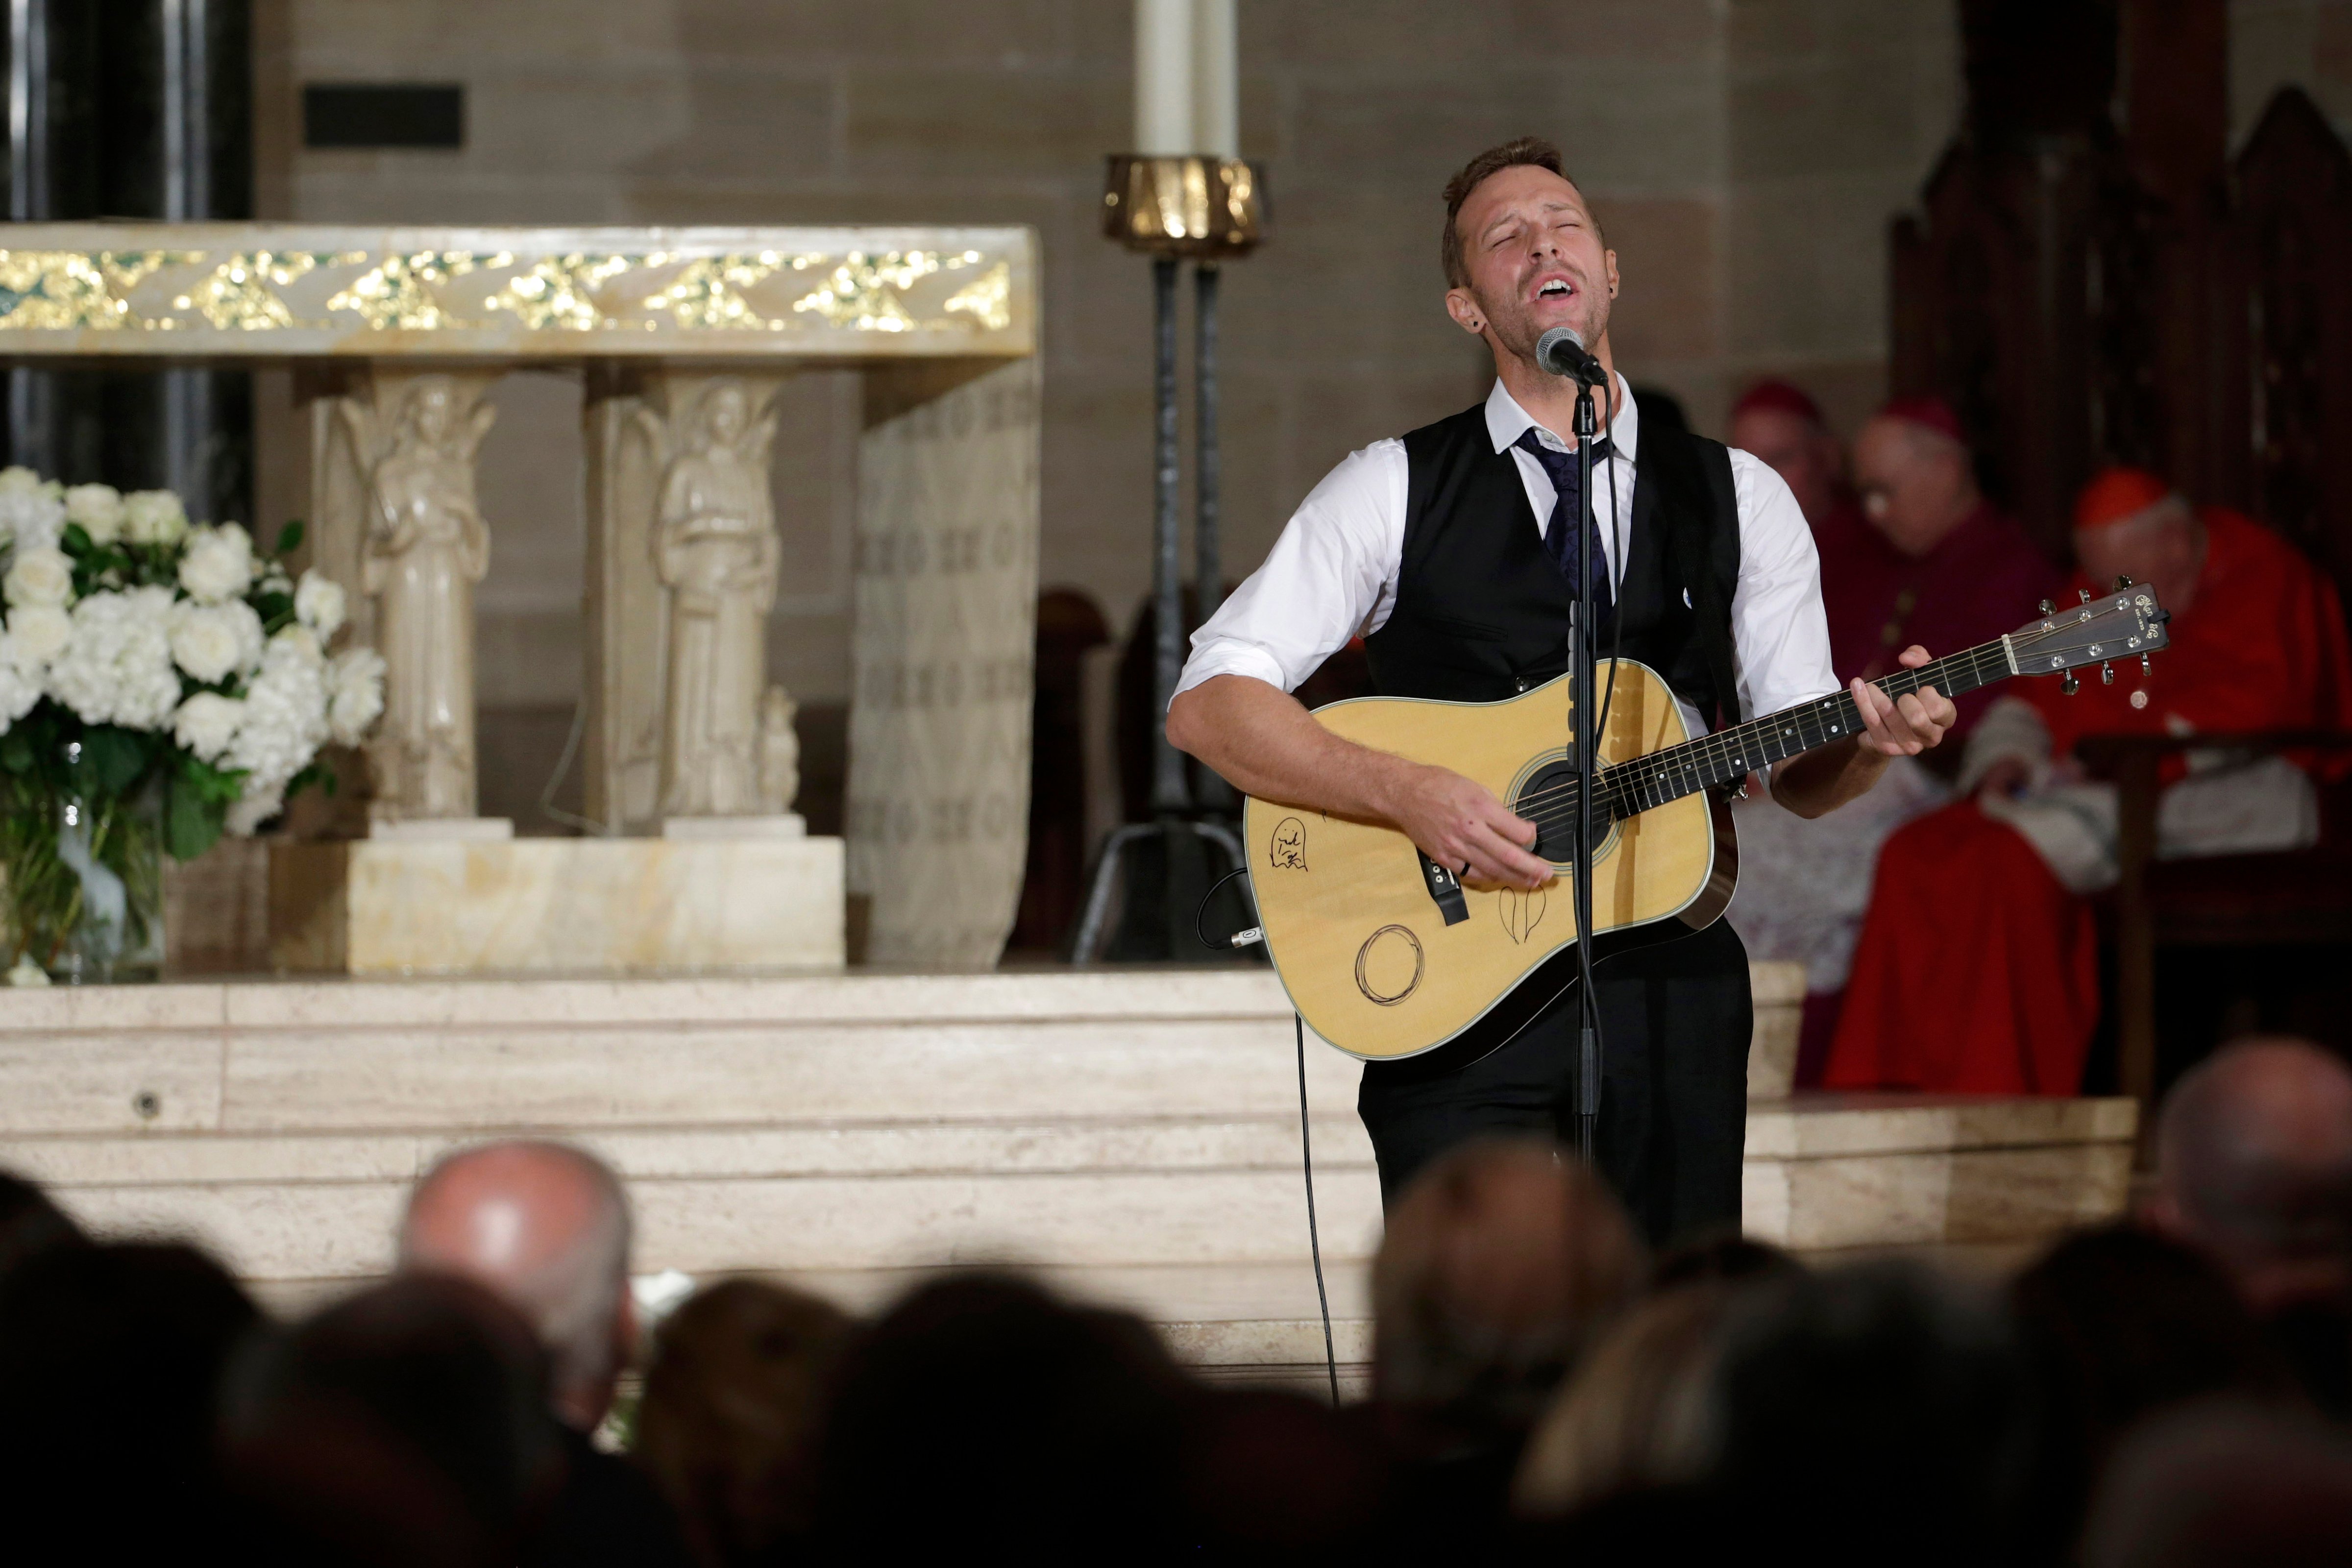 Chris Martin on the group Coldplay performs "Til Kingdom Comes" during funeral services for Vice President Joe Biden's son, former Delaware Attorney General Beau Biden, at St. Anthony of Padua Church in Wilmington, Del., on June 6, 2015. (Pablo Martinez Monsivais—AP)